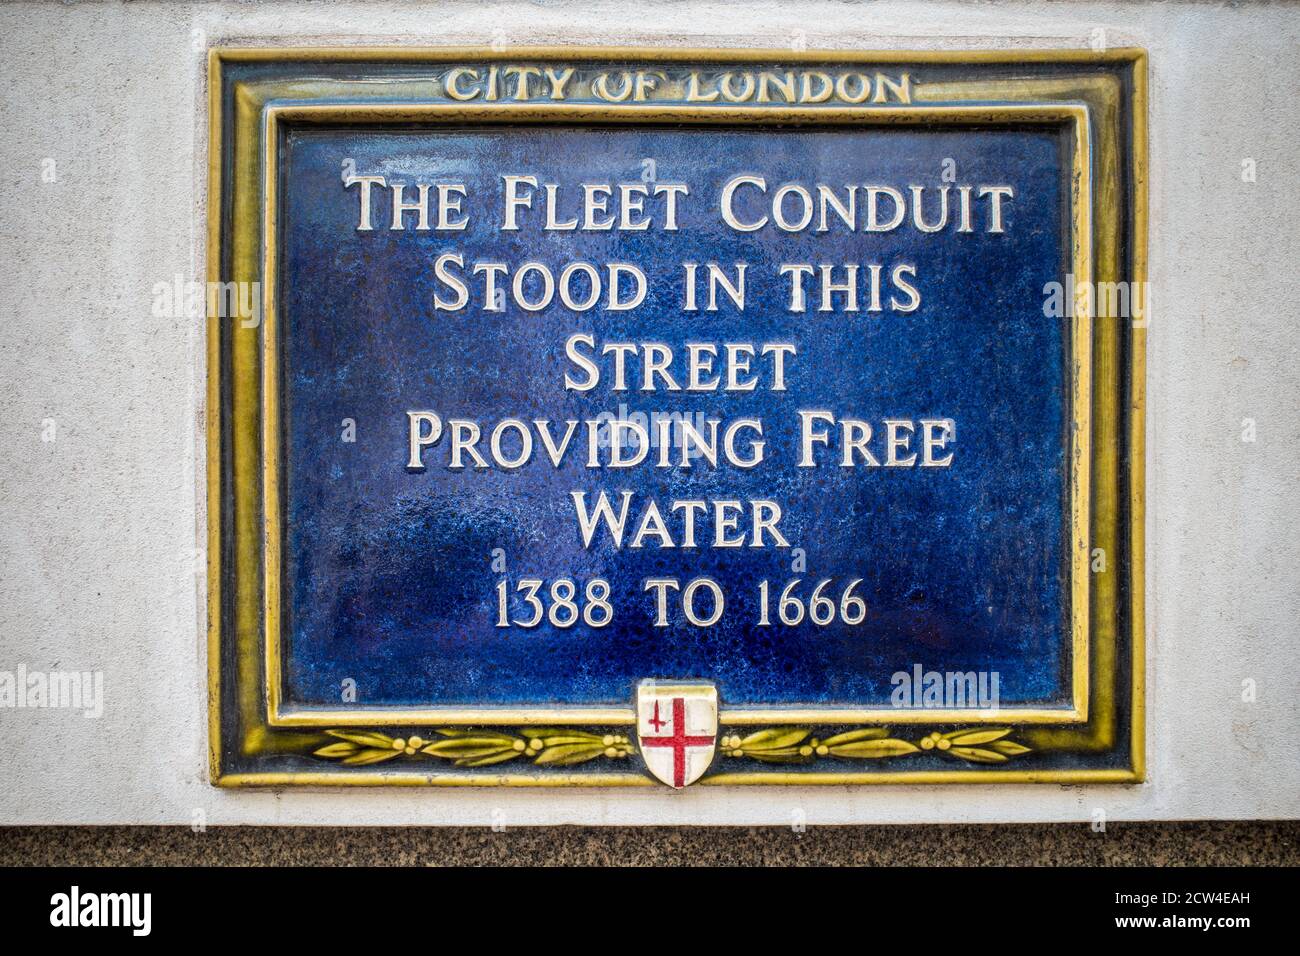 Historic Sign for the Fleet Conduit on Fleet Street Central London, providing free water between 1388 - 1666. City of London historic plaque. Stock Photo